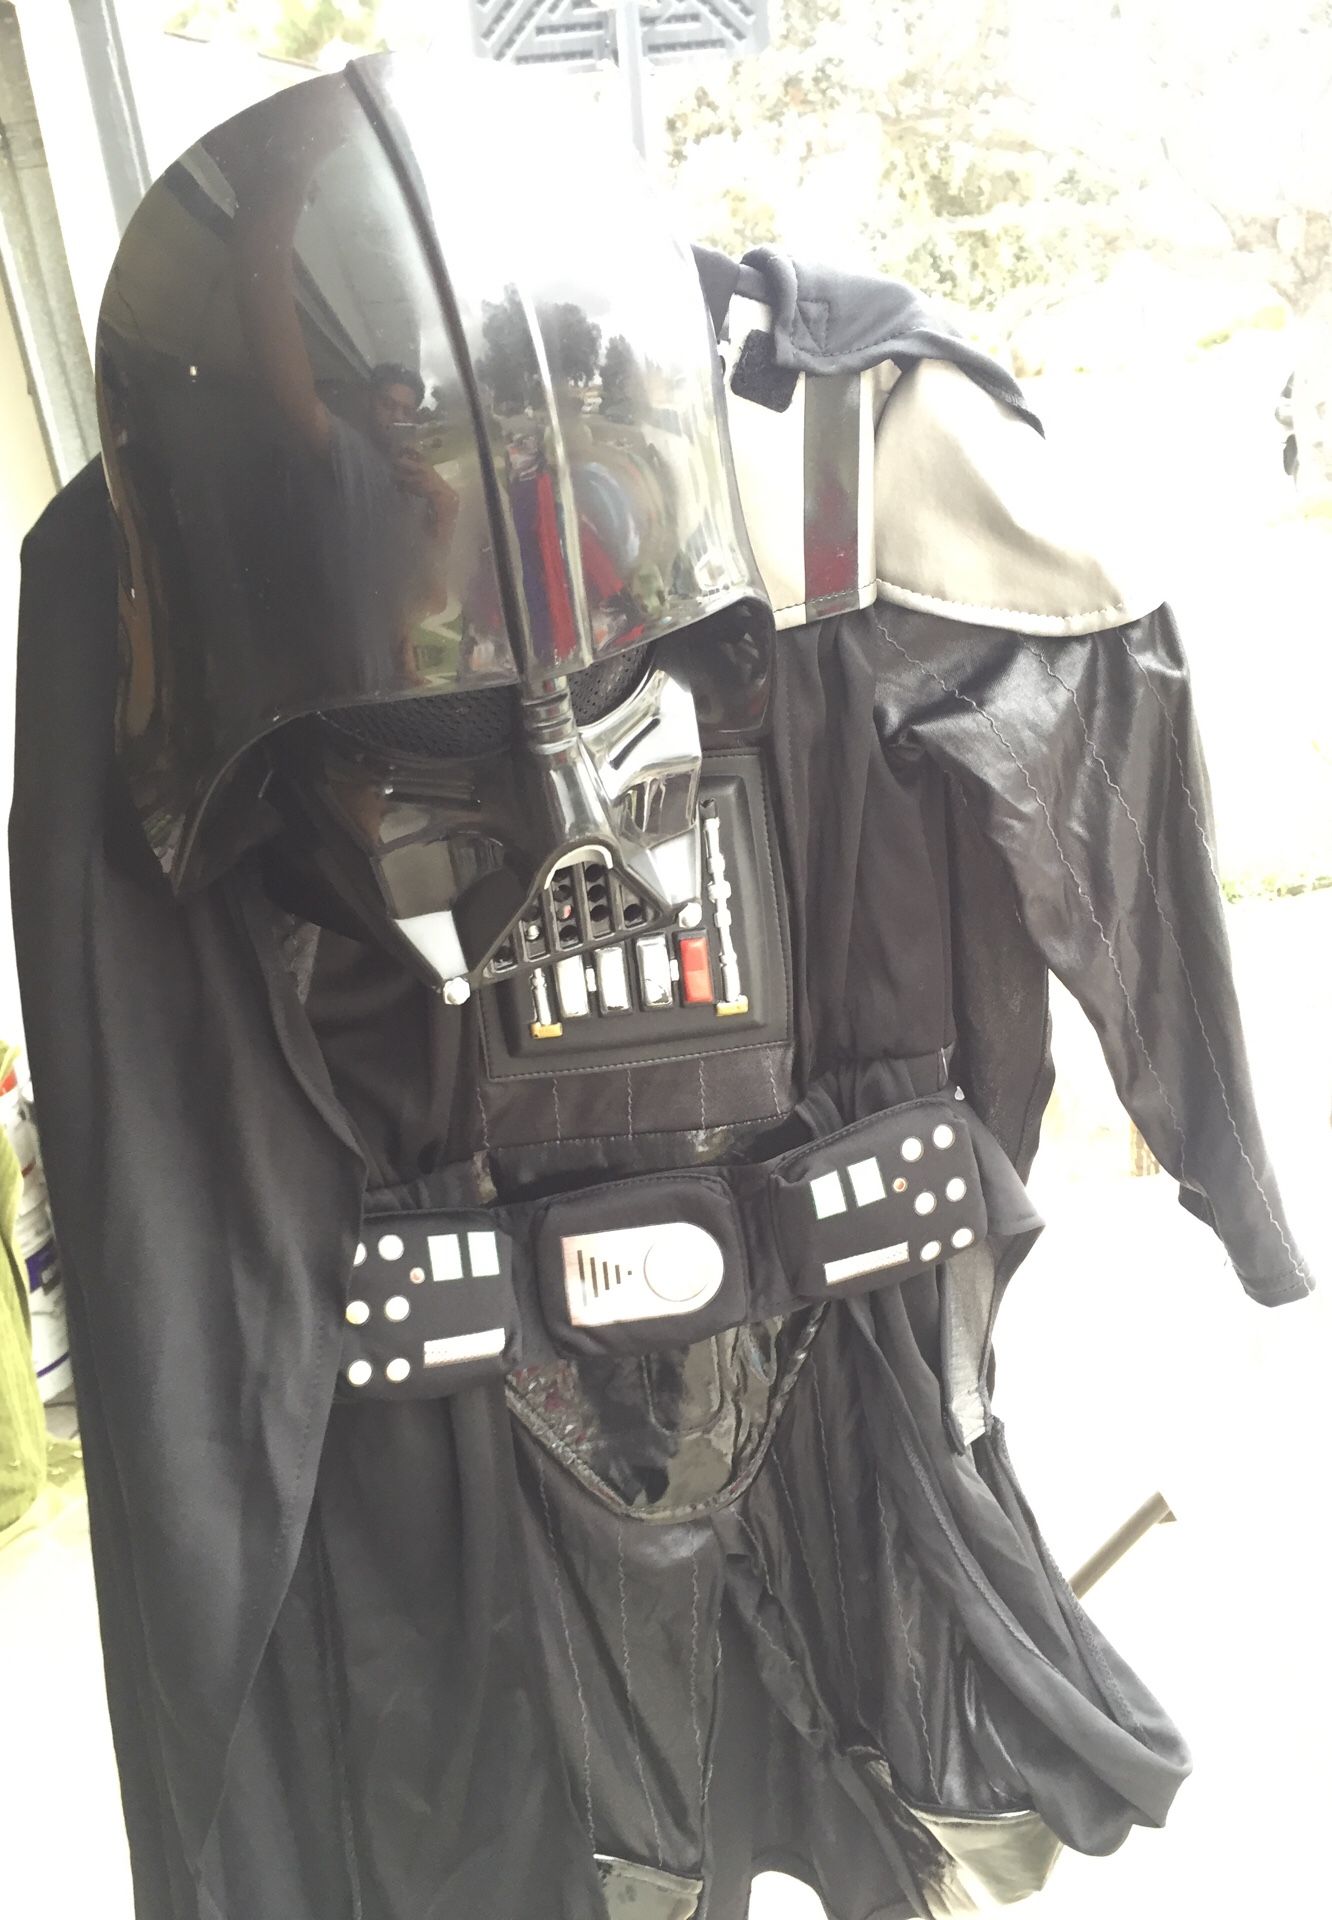 New with tags NWT Star Wars darth Vader costume halloween toddler 4